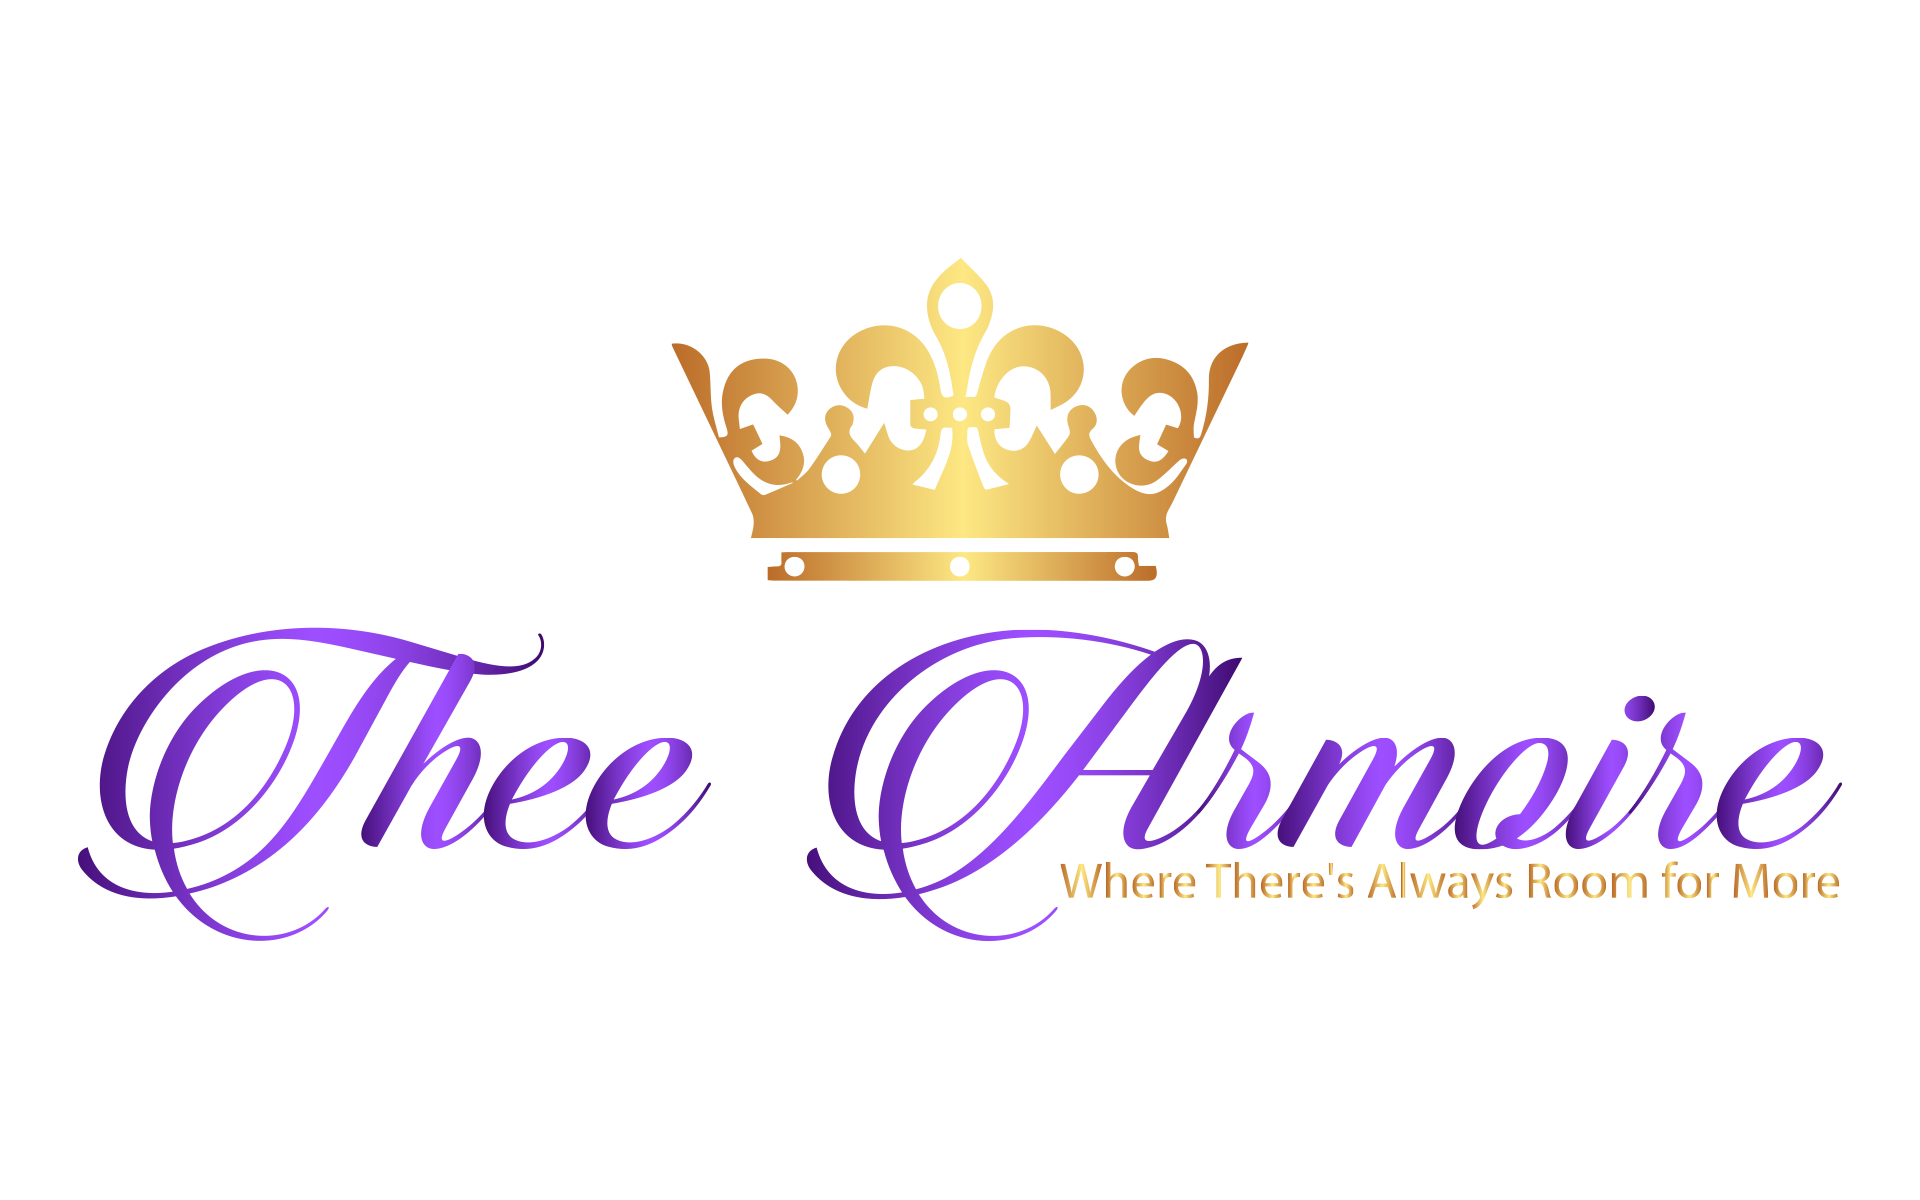 Online boutique store name Thee Armoire